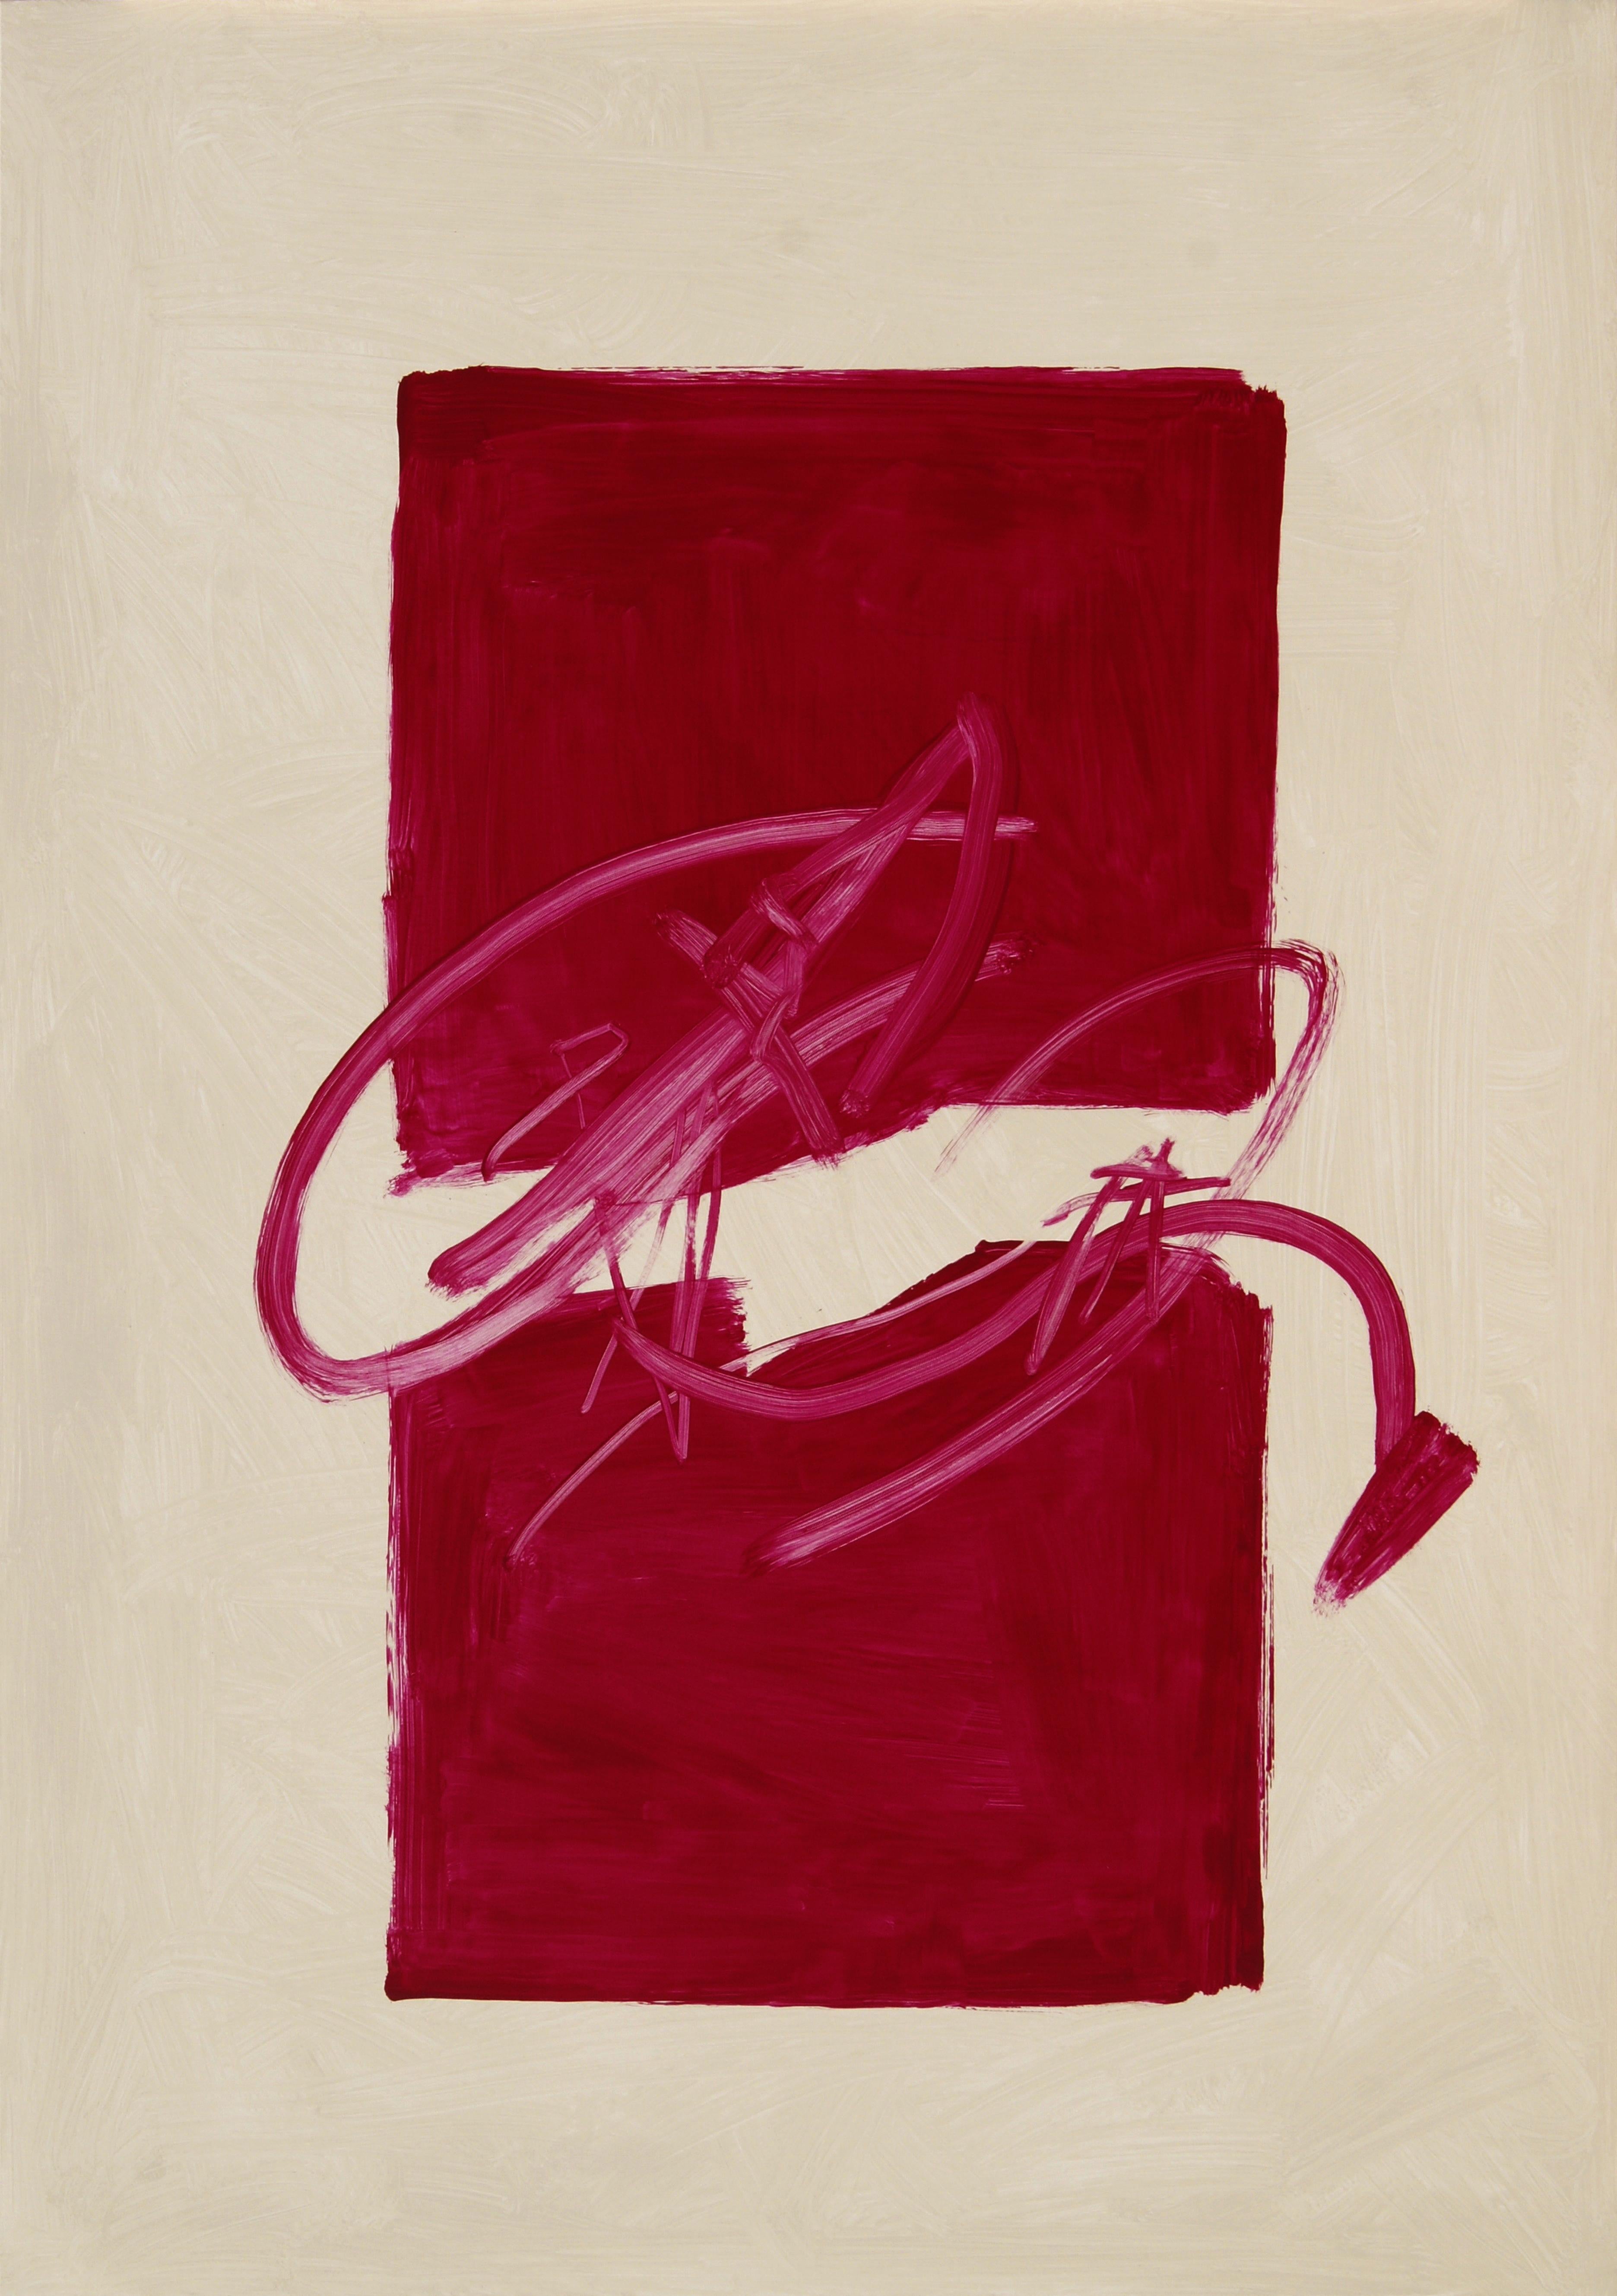 RAFAEL RUZ Abstract Painting - Ruz  Light Background  Red  Vertical  Big Abstract Acrylic on canvas Painting